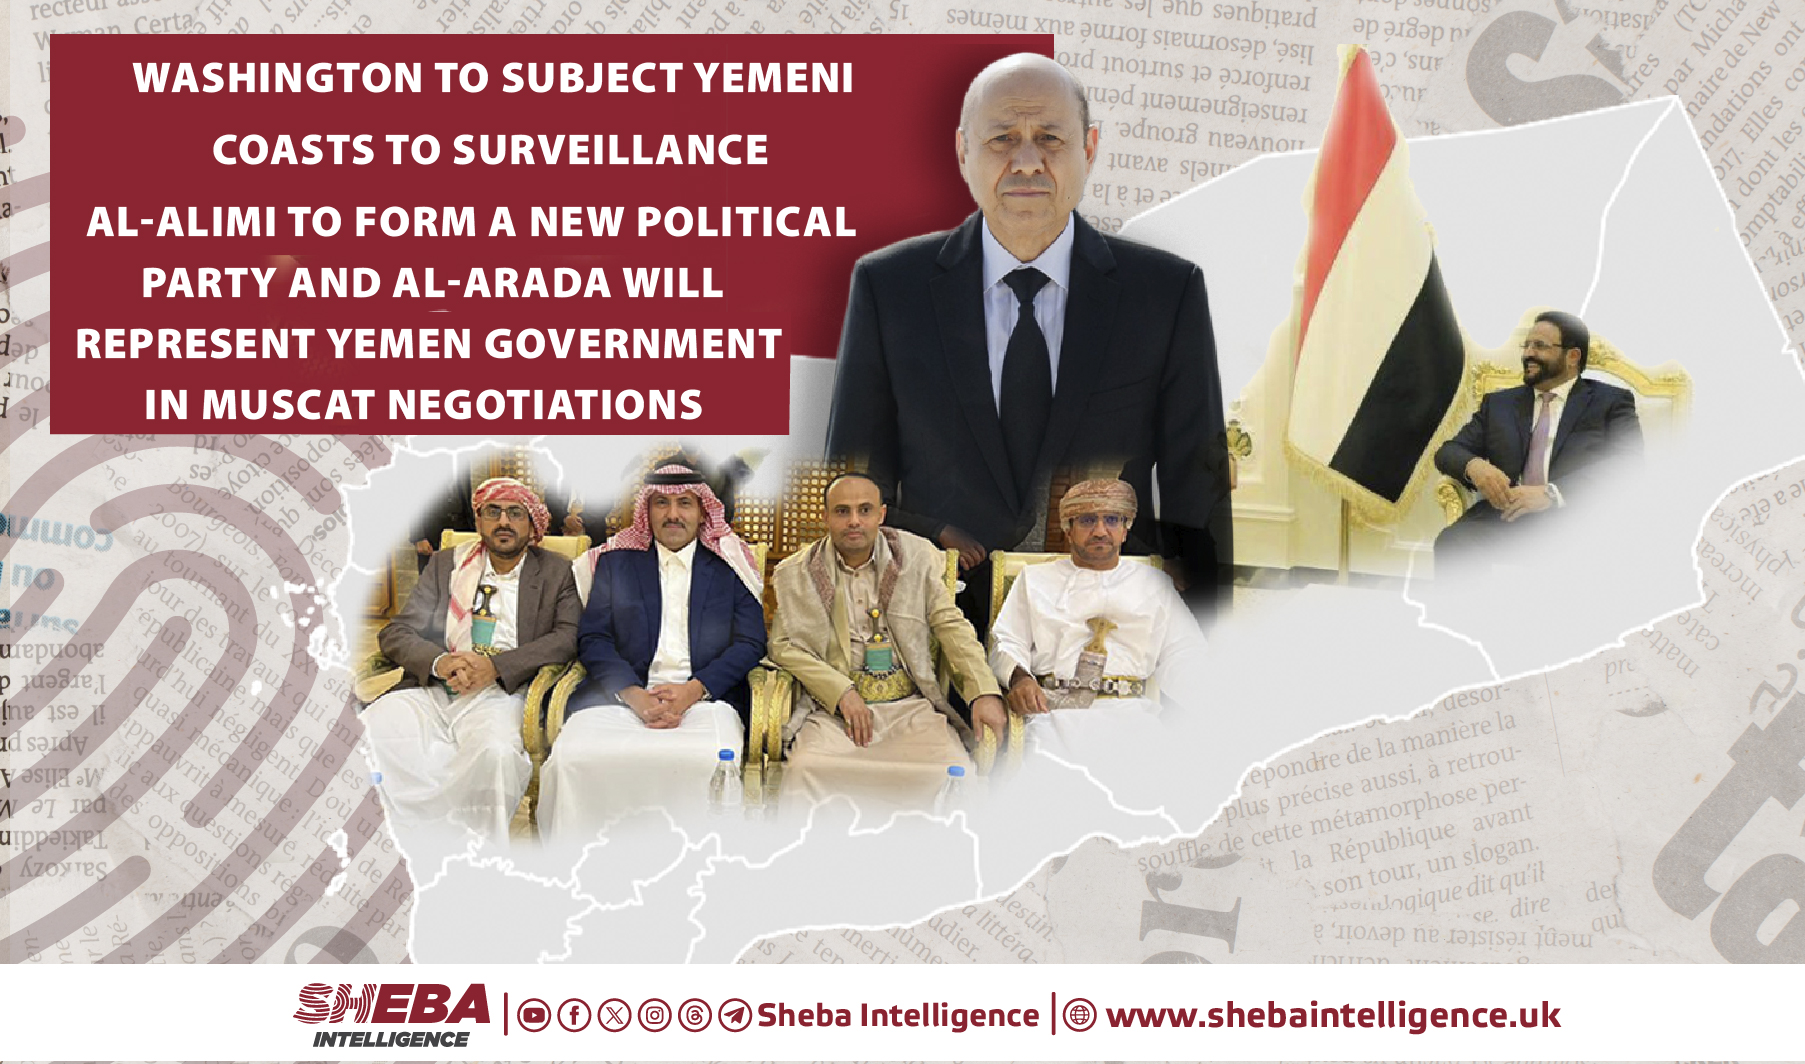 Washington to Subject Yemeni Coasts to Surveillance and Al-Alimi to Form a New Political Party and Al-Arada will represent Yemen Government in Muscat Negotiations